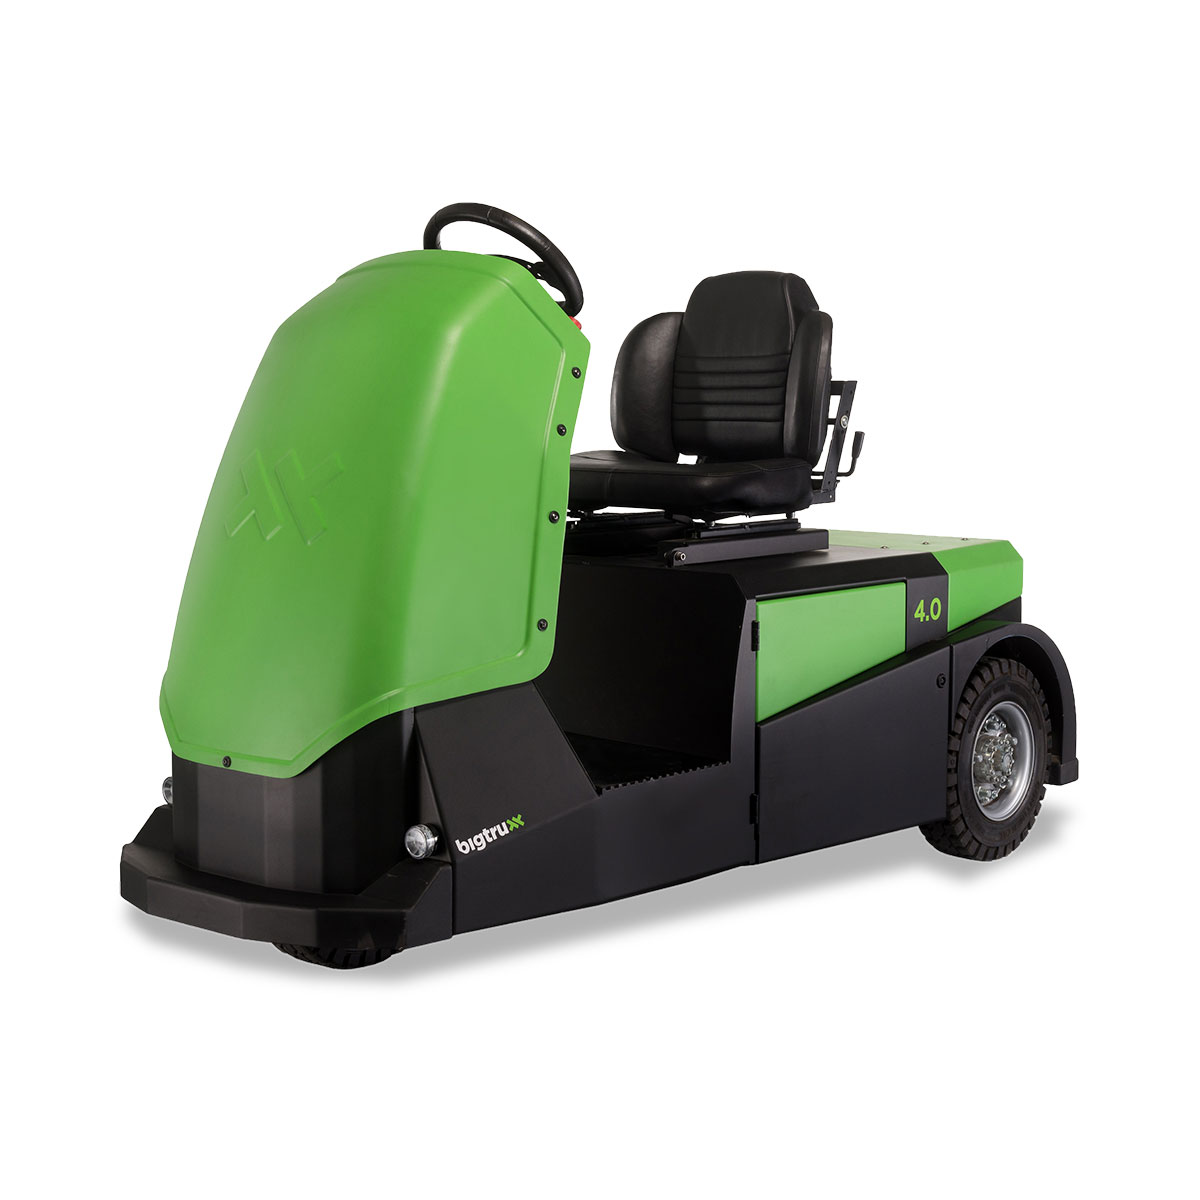 Buy Ride-on Electric Tug  -  BigTruxx in Electric Tugs from Movexx available at Astrolift NZ